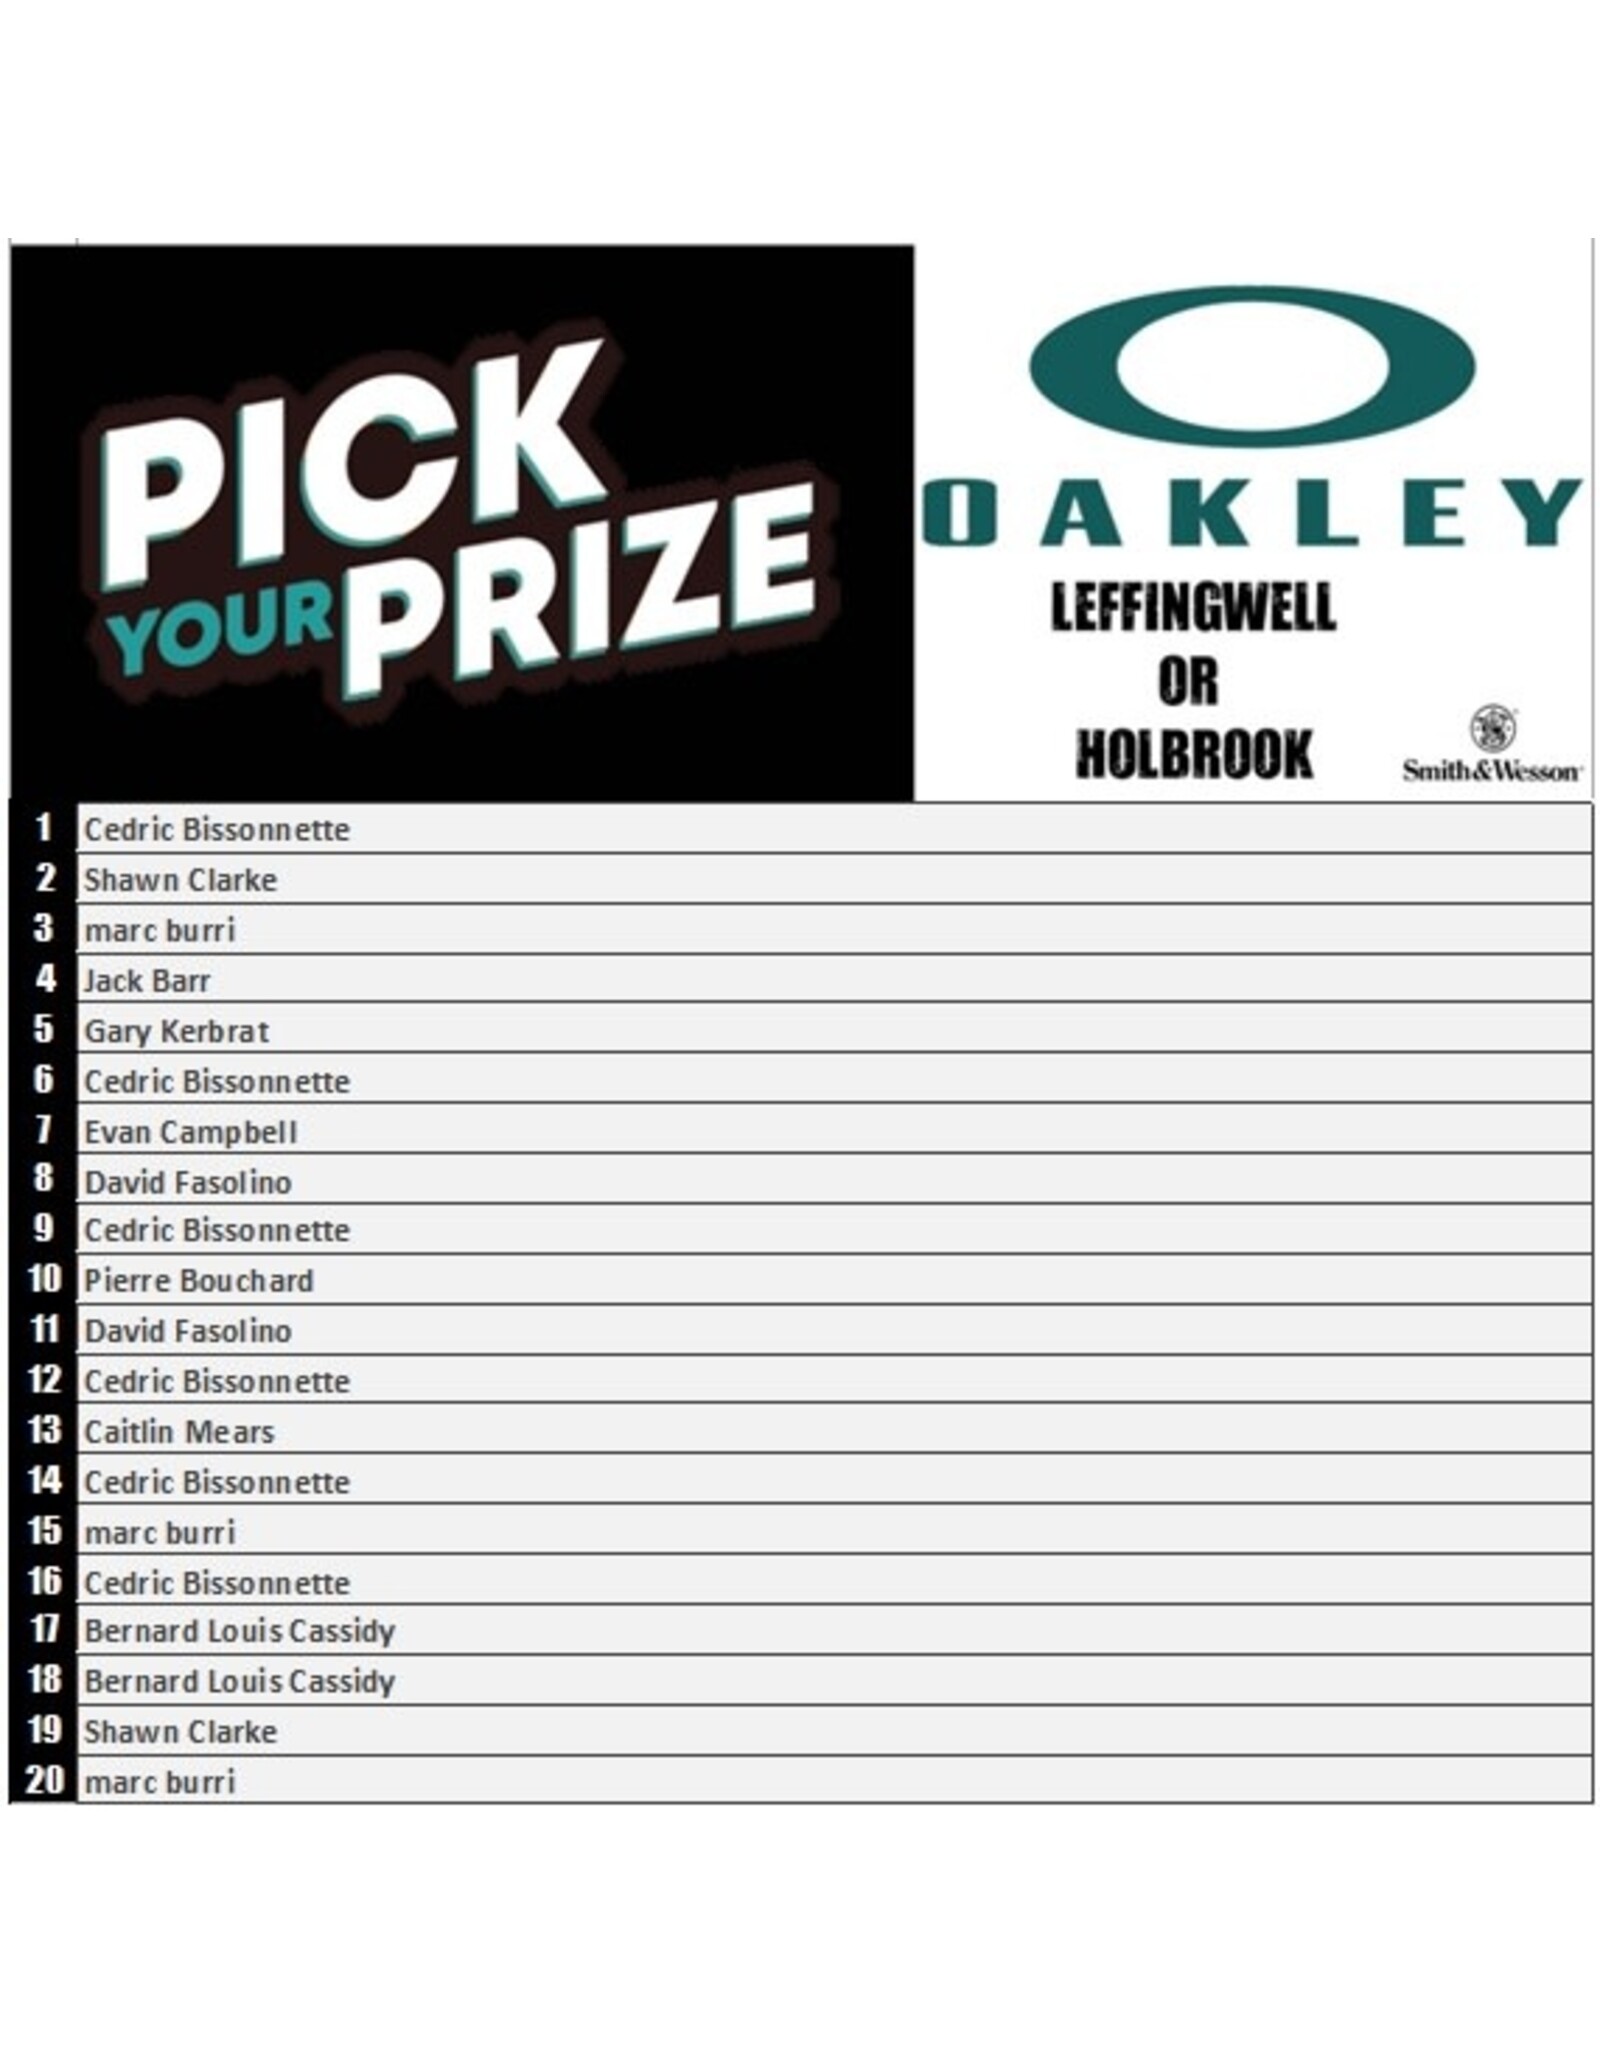 DRAW #1297 - Pick Your Prize - Oakley + Smith&Wesson